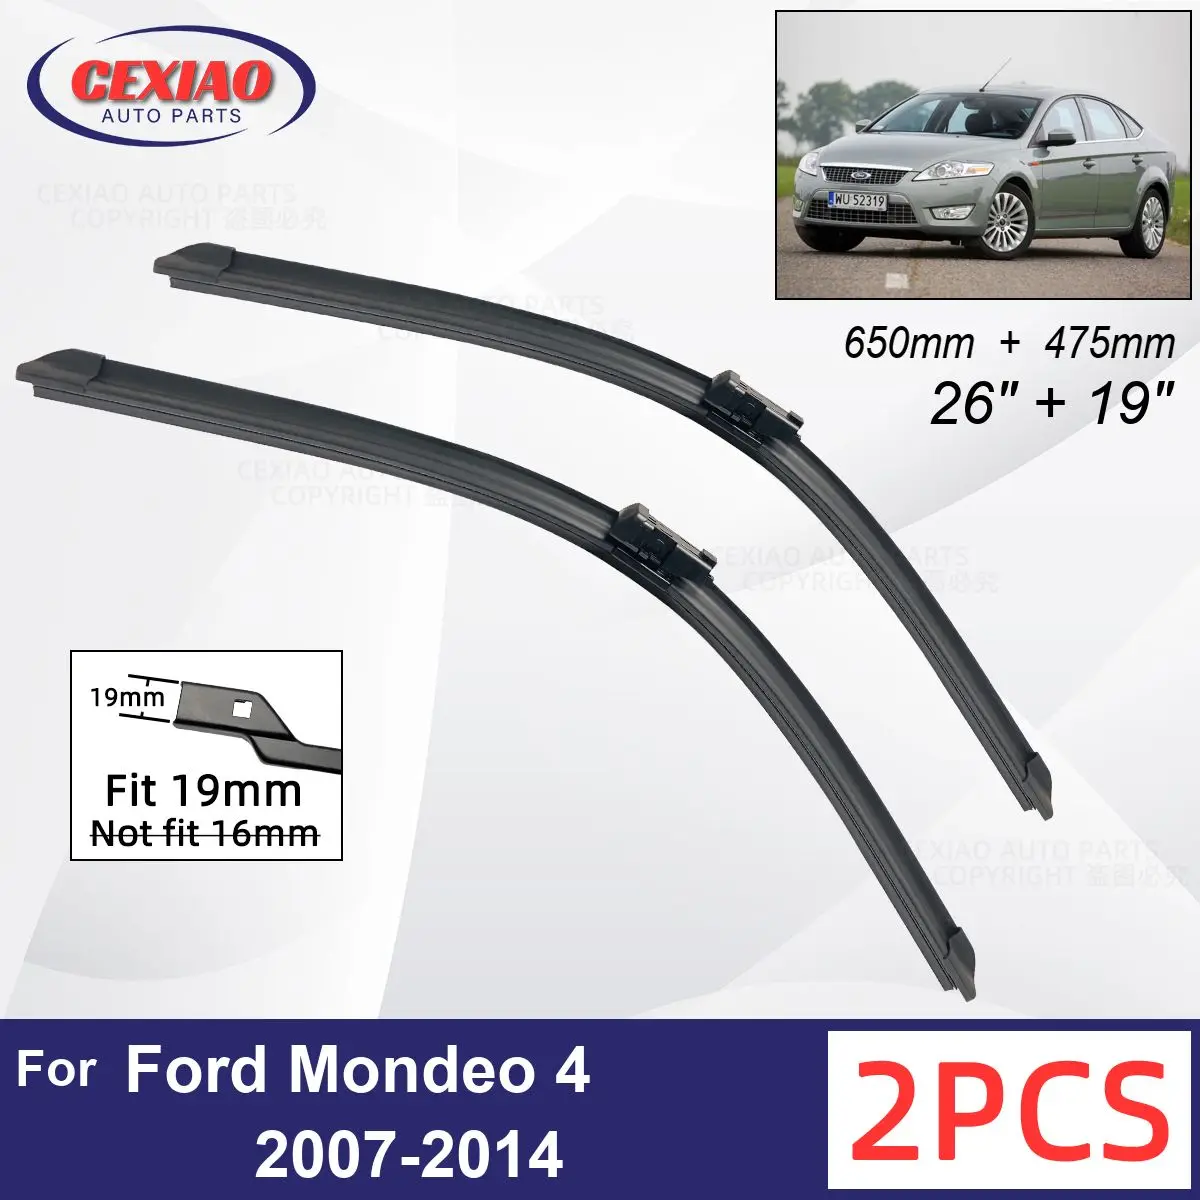 

Car Wiper For Ford Mondeo 4 2007-2014 Front Wiper Blades Soft Rubber Windscreen Wipers Auto Windshield 26" 19" 650mm 475mm